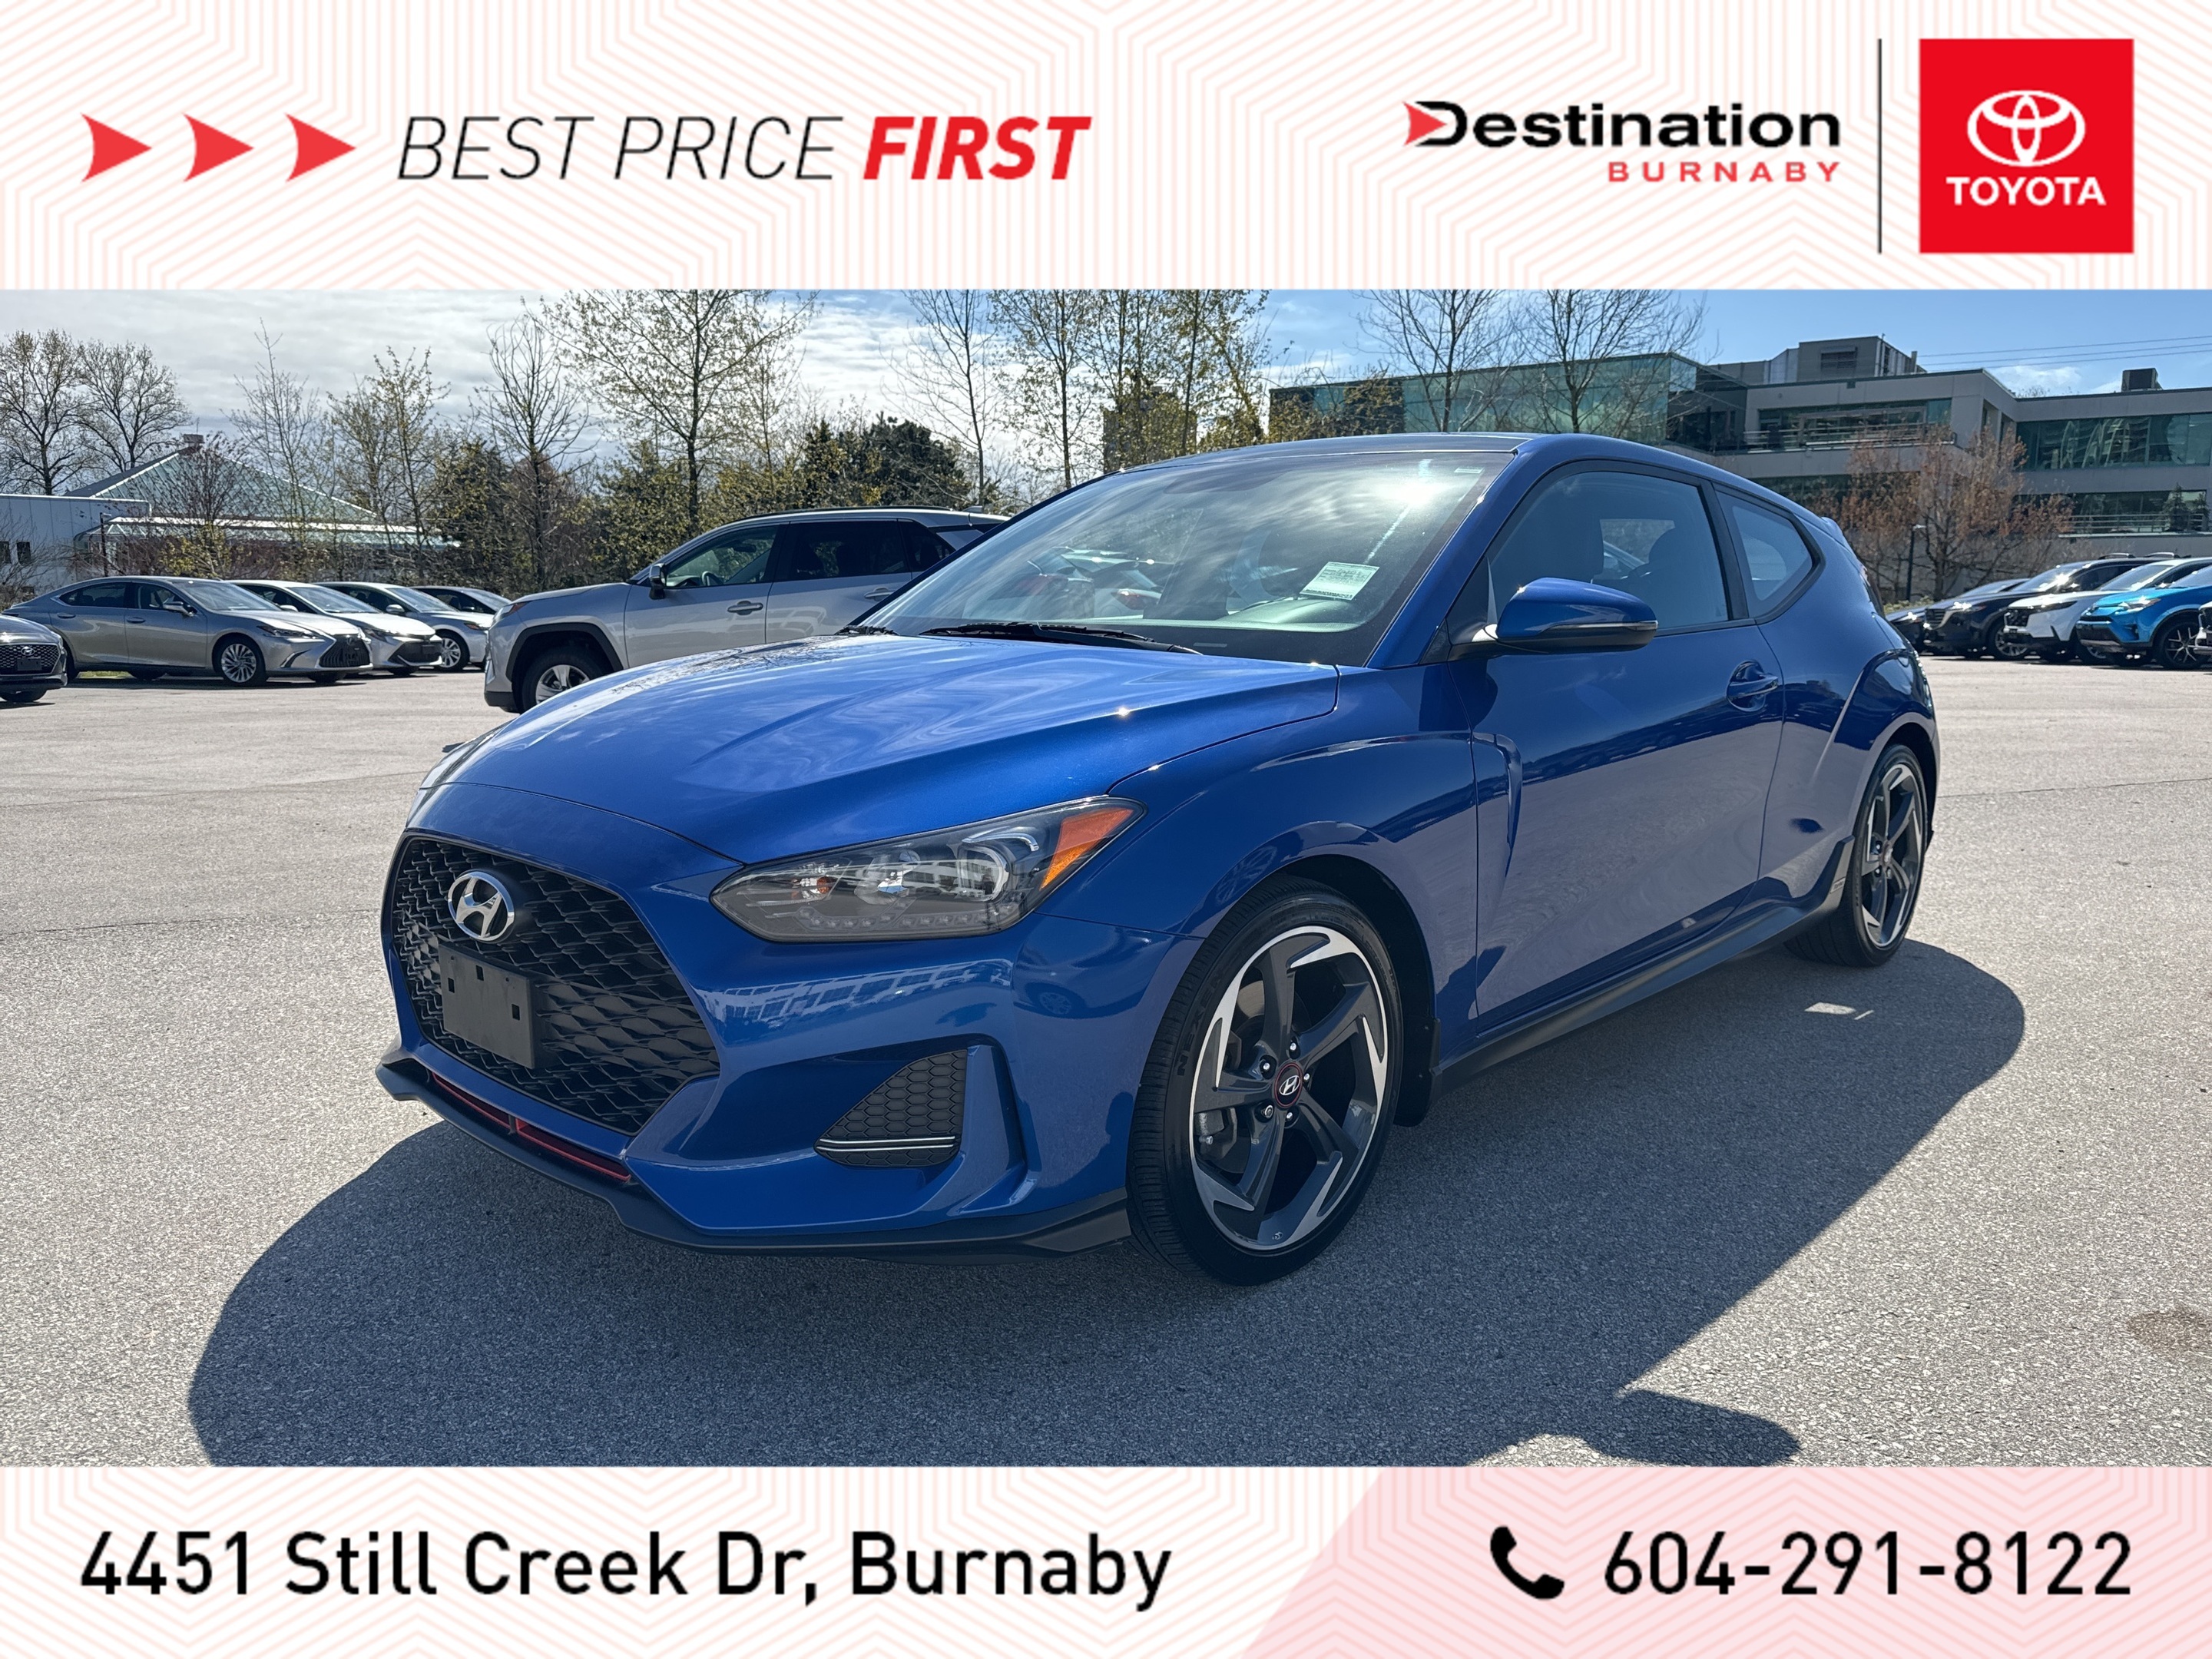 2019 Hyundai Veloster Turbo - 6 Speed Manual! No Accidents!